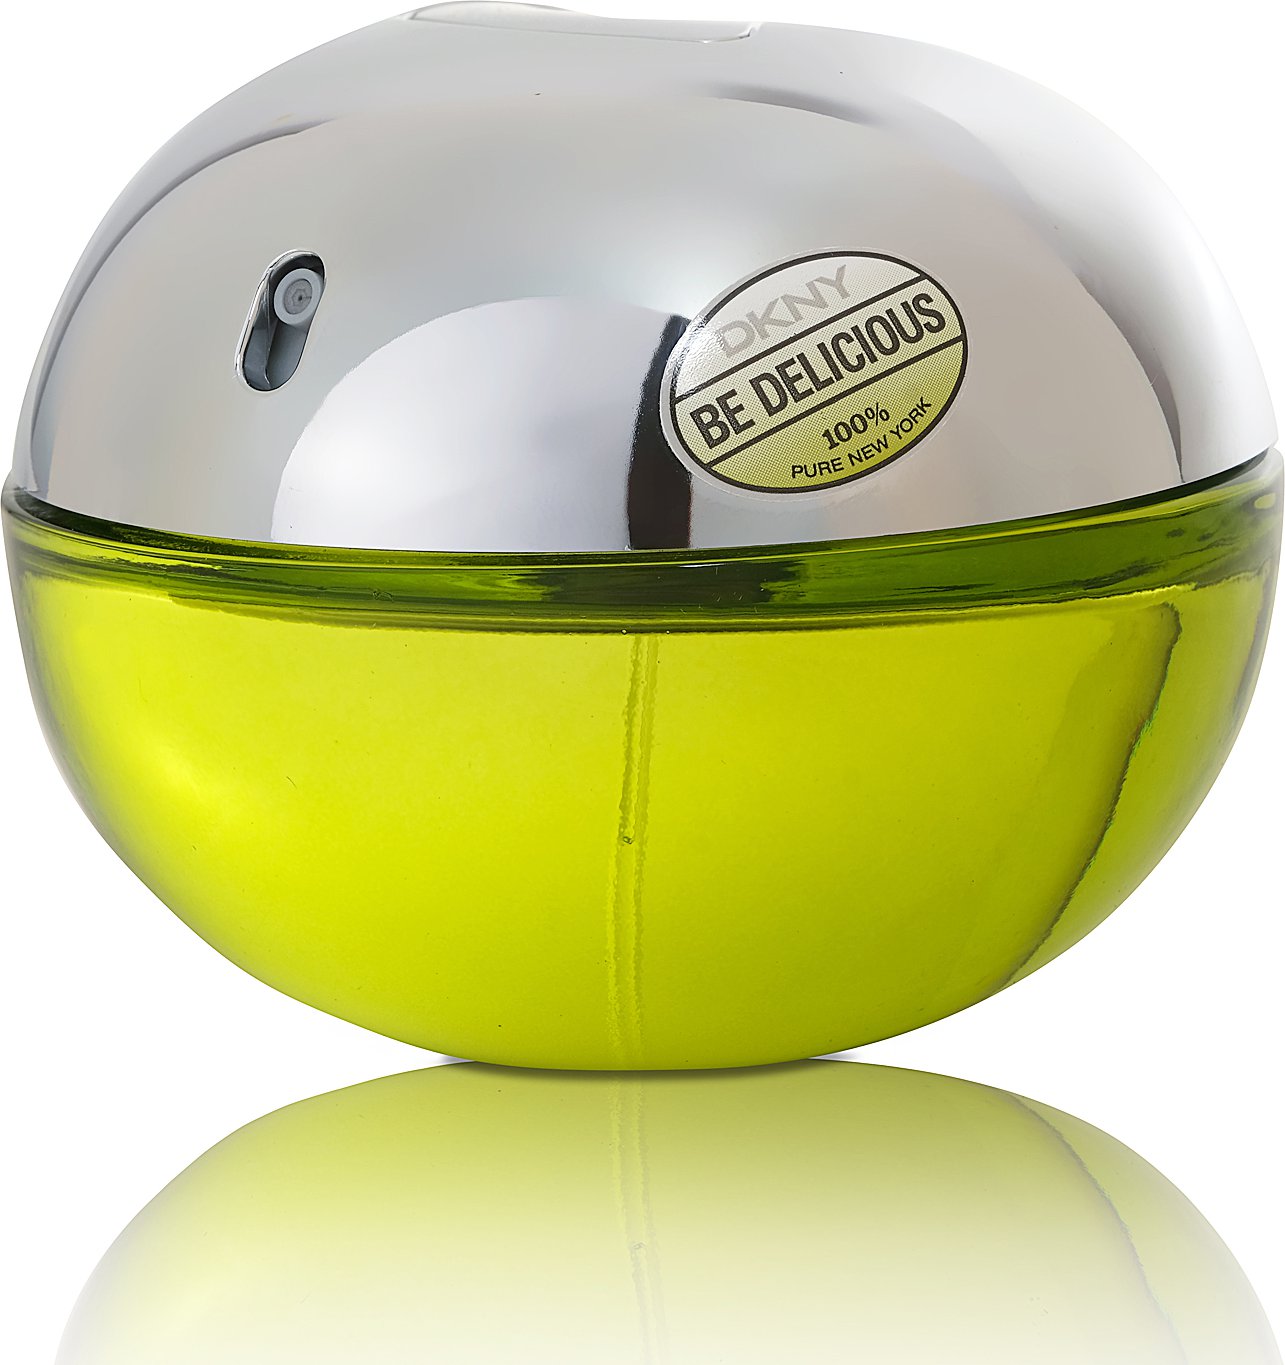 Dkny be delicious цены. DKNY be delicious 50ml. Духи DKNY be delicious. DKNY be delicious EDP (50 мл). DKNY be delicious 30 мл.